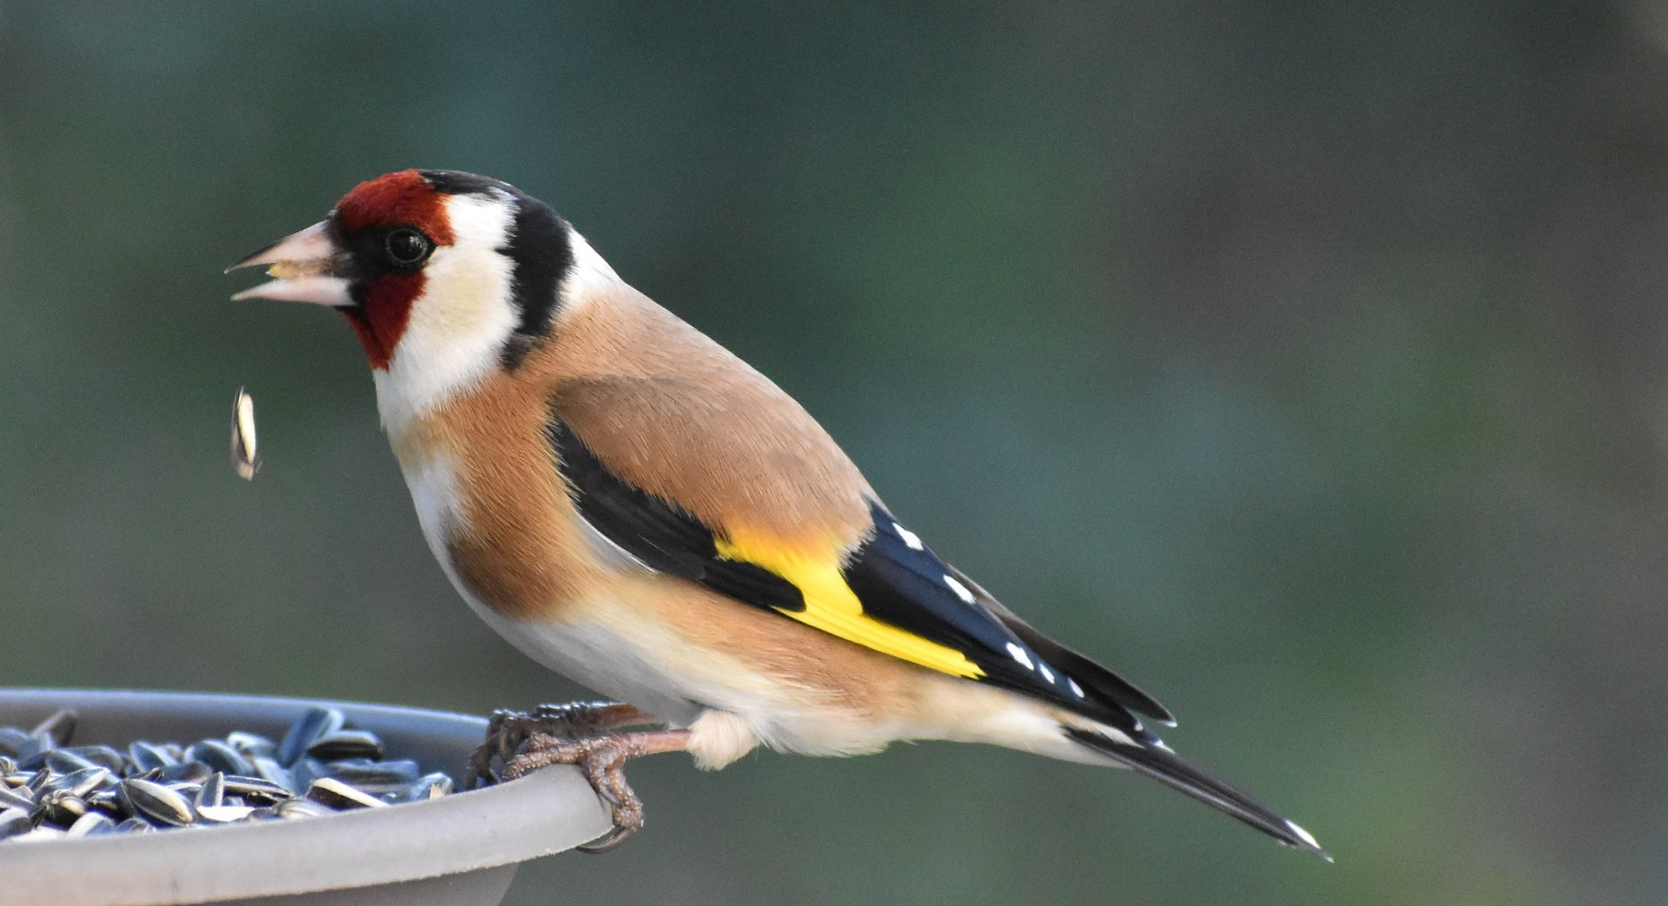 goldfinch eating sunflower seeds